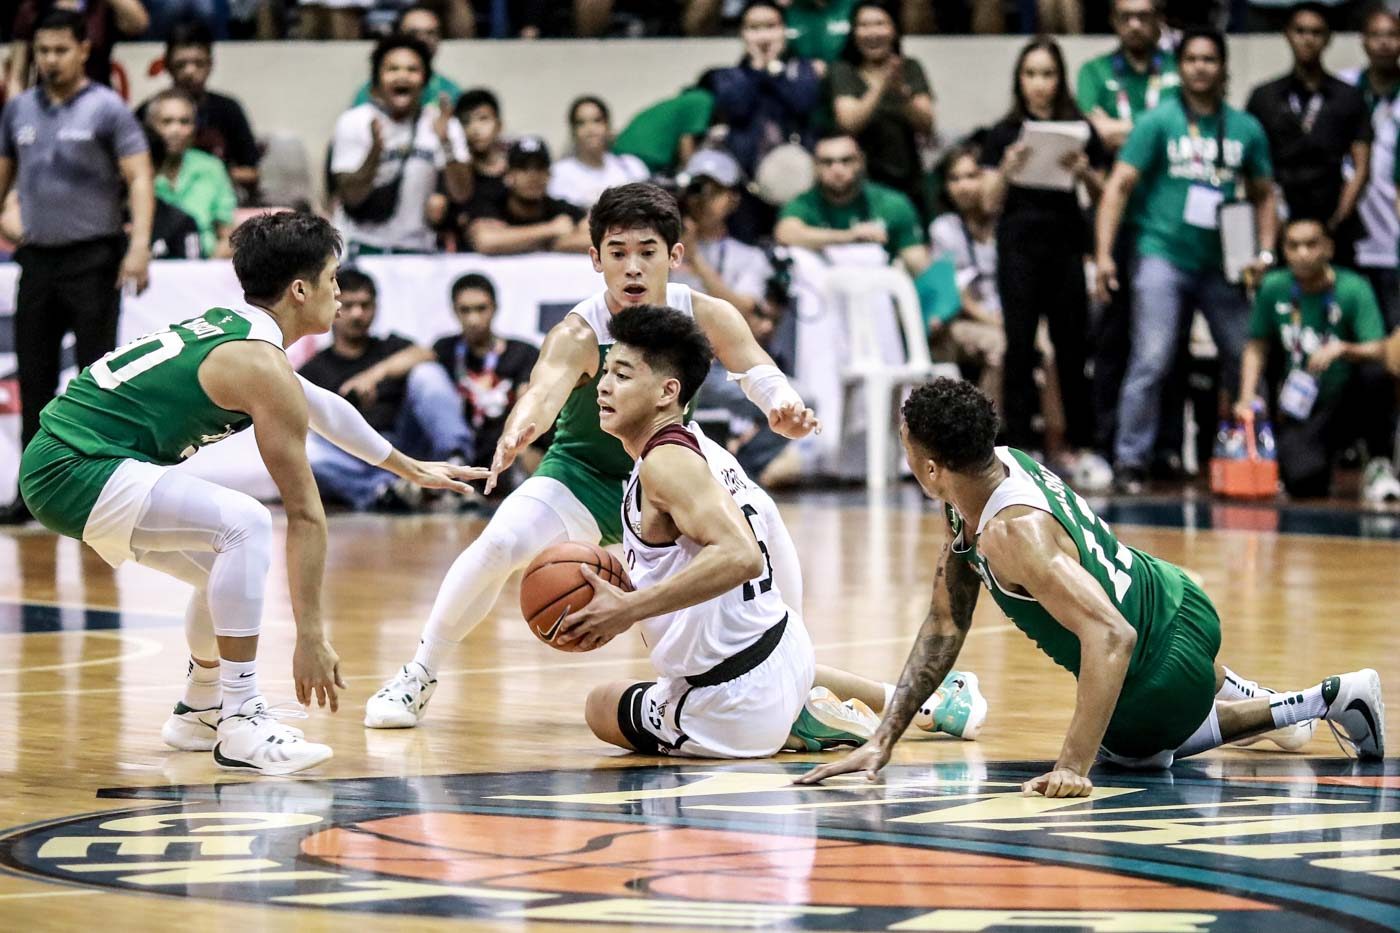 FIGHTBACK. La Salle storms back from 16 points down to rattle UP, but Ricci Rivero helps the Maroons regain their bearings. Photo by Michael Gatpandan/Rappler  